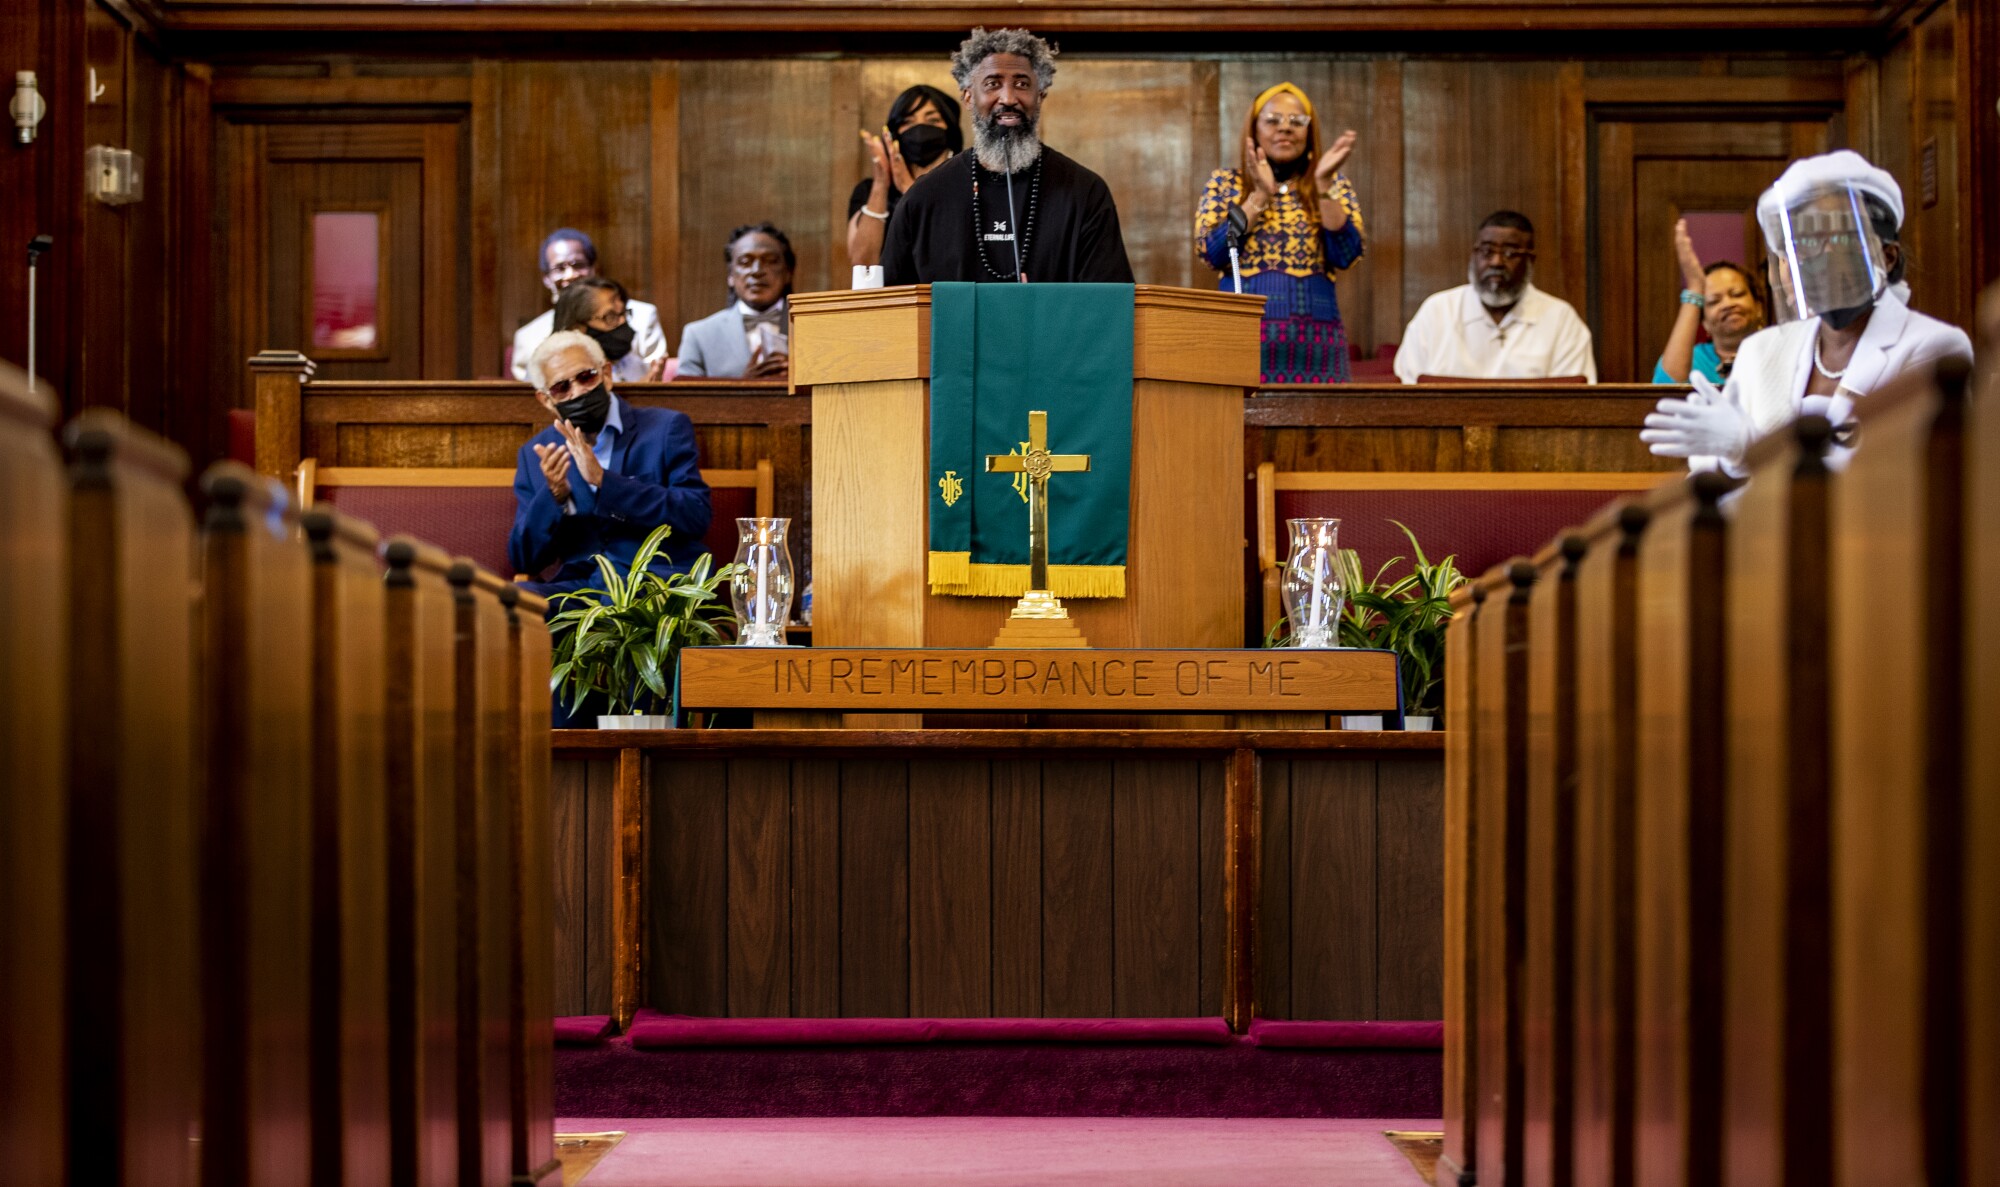 A pastor giving a sermon from a church pulpit as people around him applaud